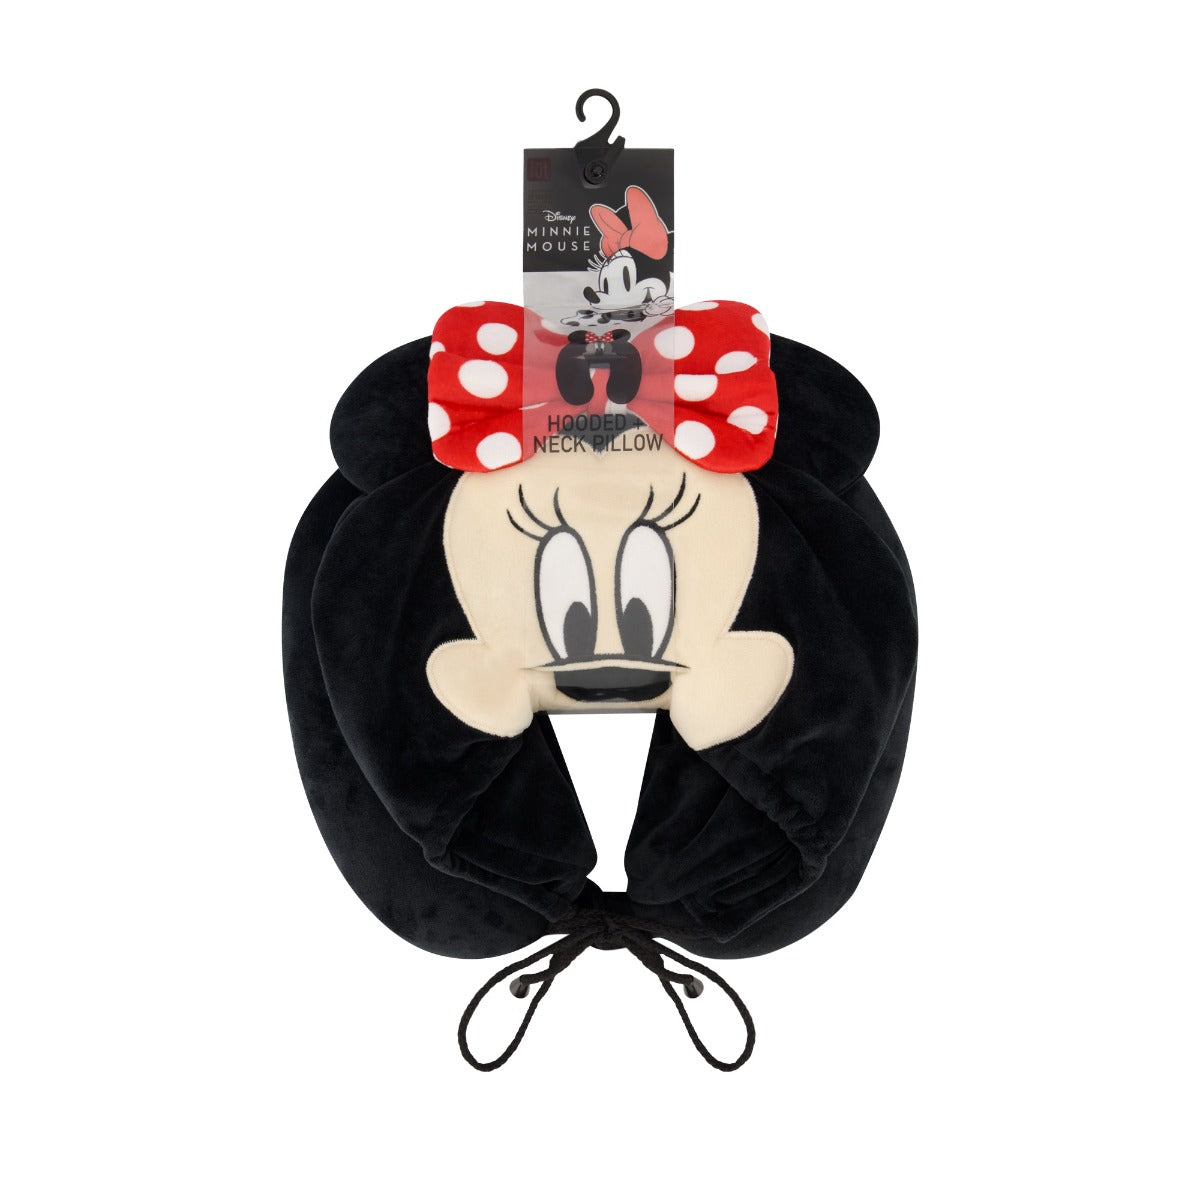 Black Ful Disney Minnie Mouse hooded travel pillow - best hoodie neck pillows for traveling